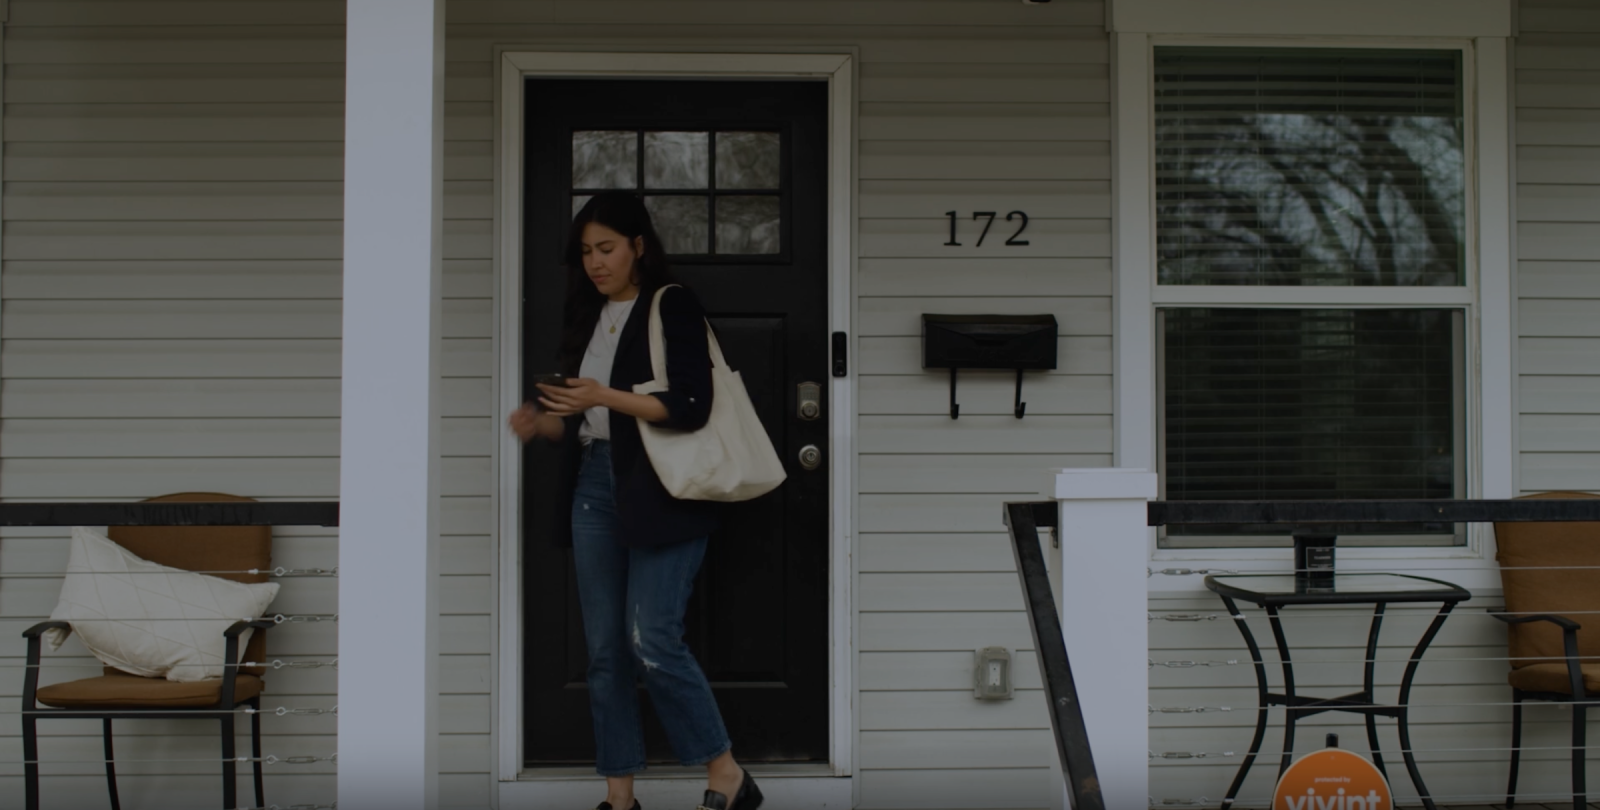 A woman checks her phone while closing her front door, which has a Vivint Doorbell Camera Pro mounted nearby